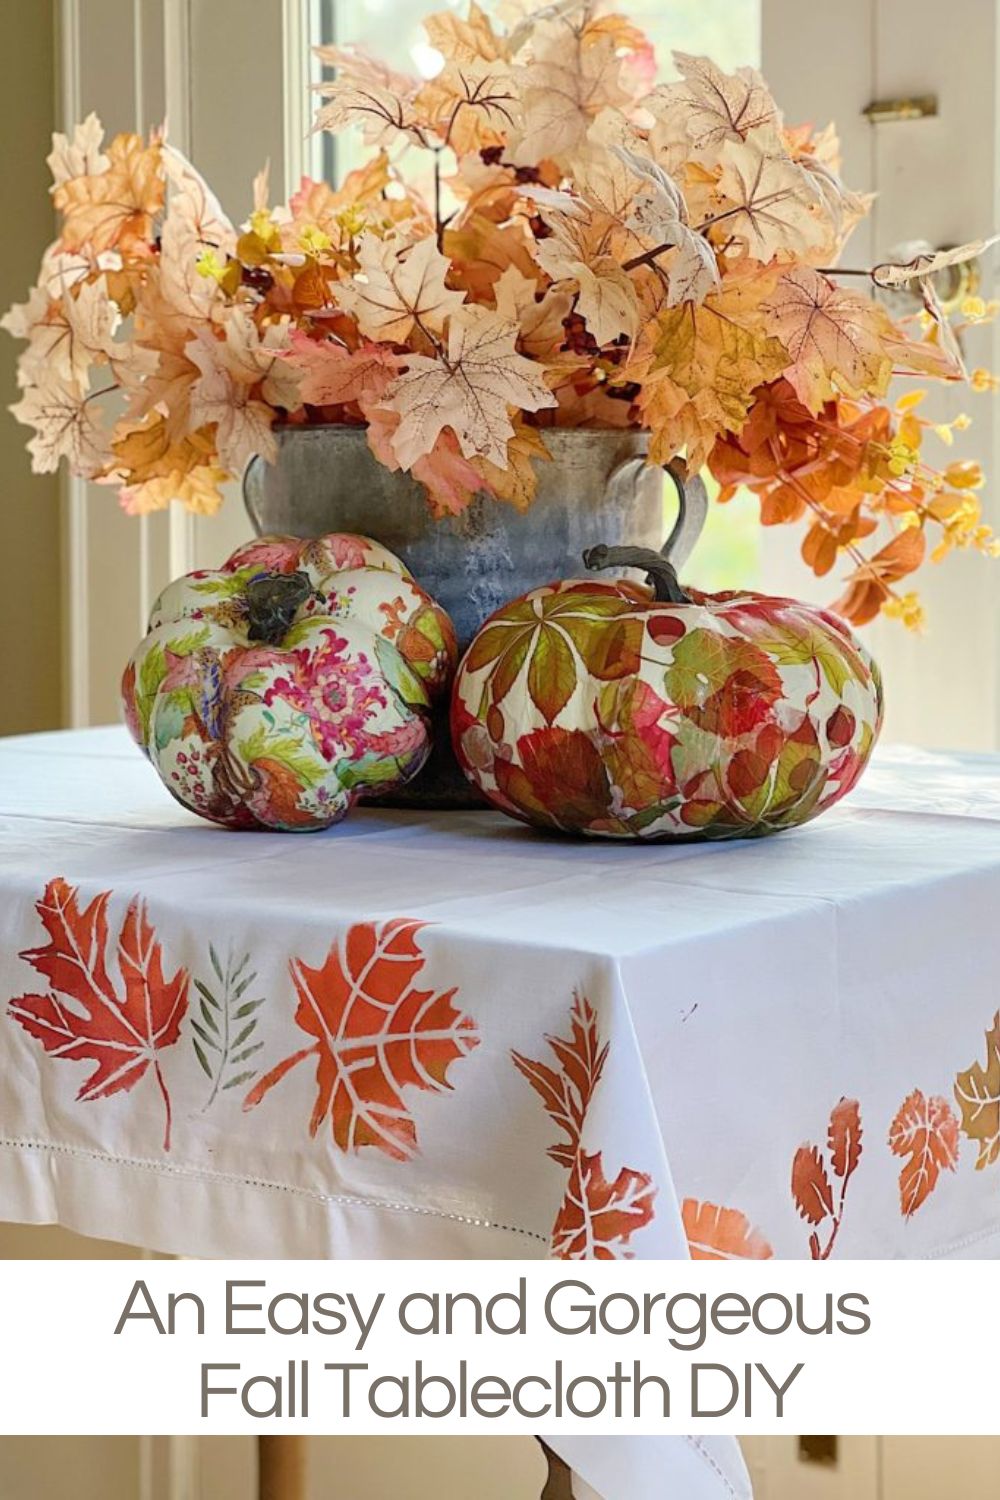 I have never made a fall tablecloth and decided to make one using stencils and metallic paint. I am so happy with how this turned out!